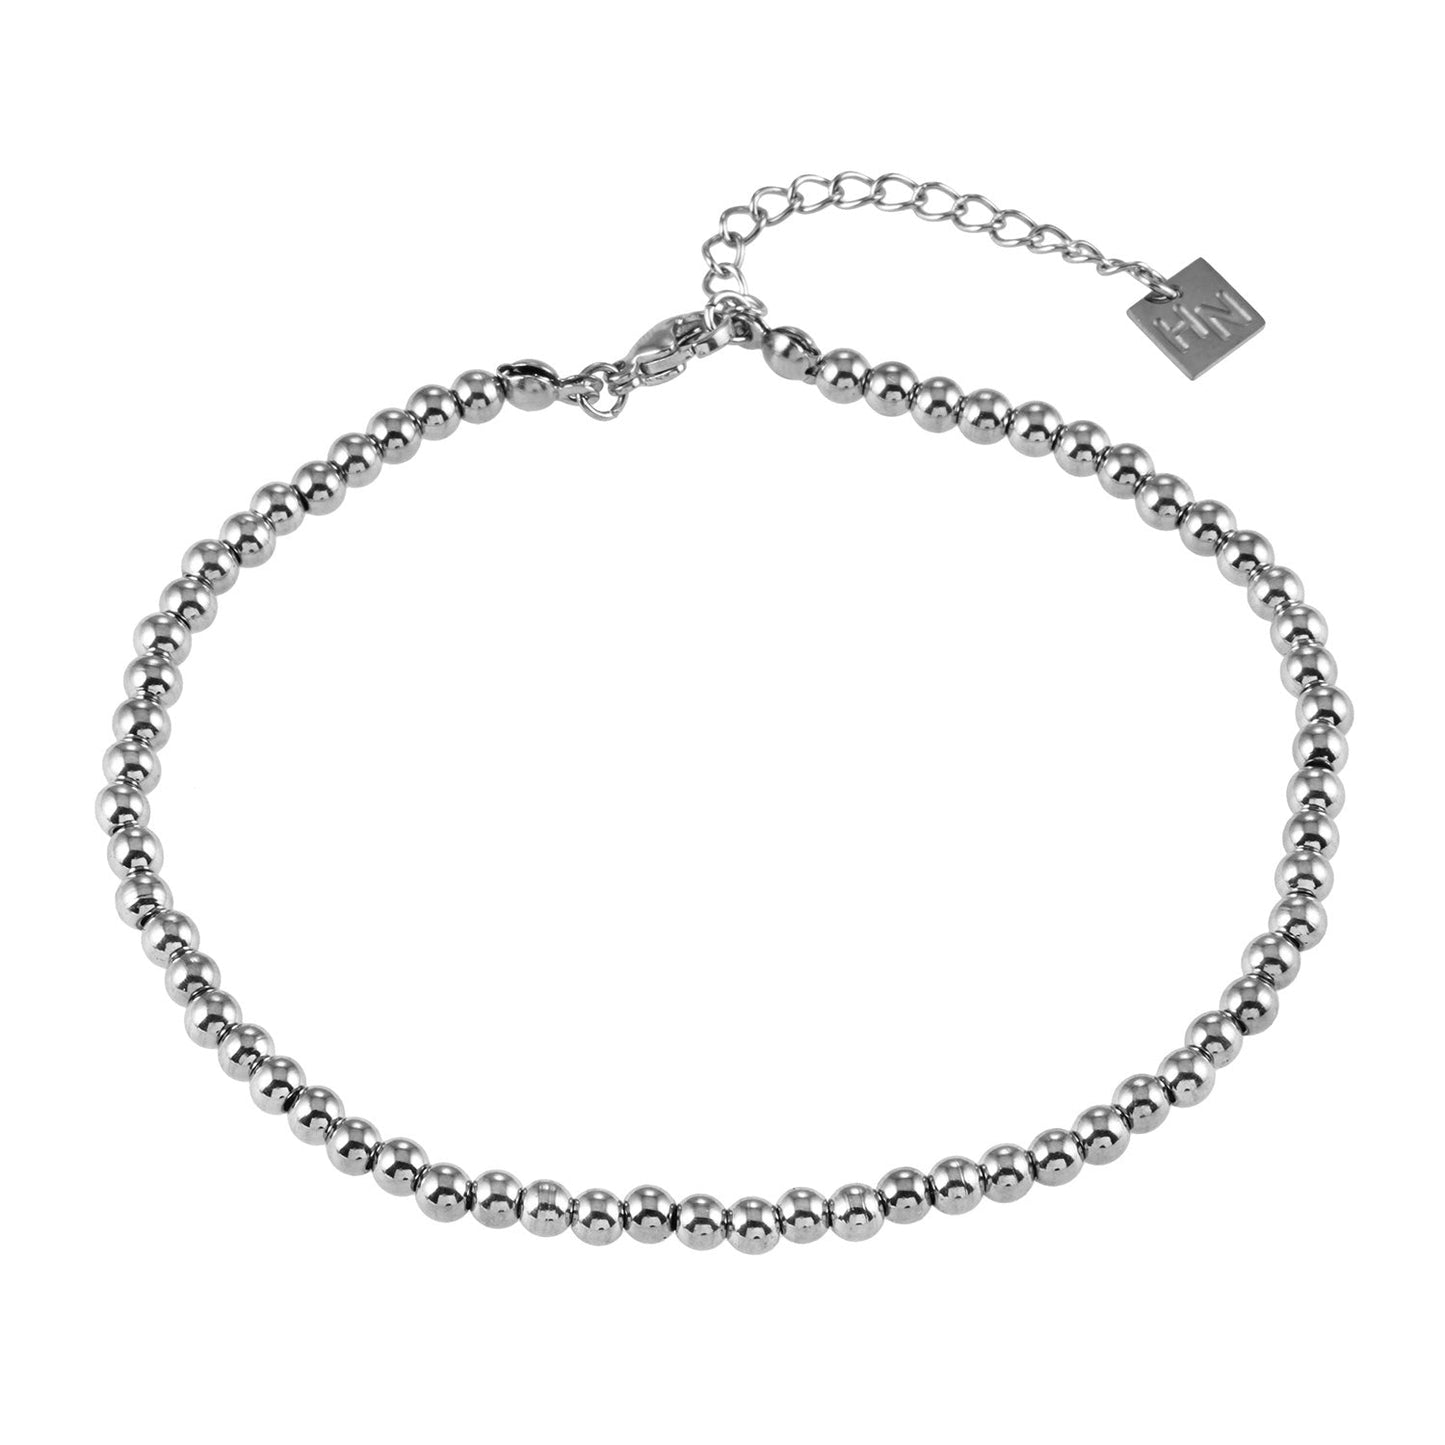 MANAMI LG: Ball-Beads Contemporary Chain Silver Anklet